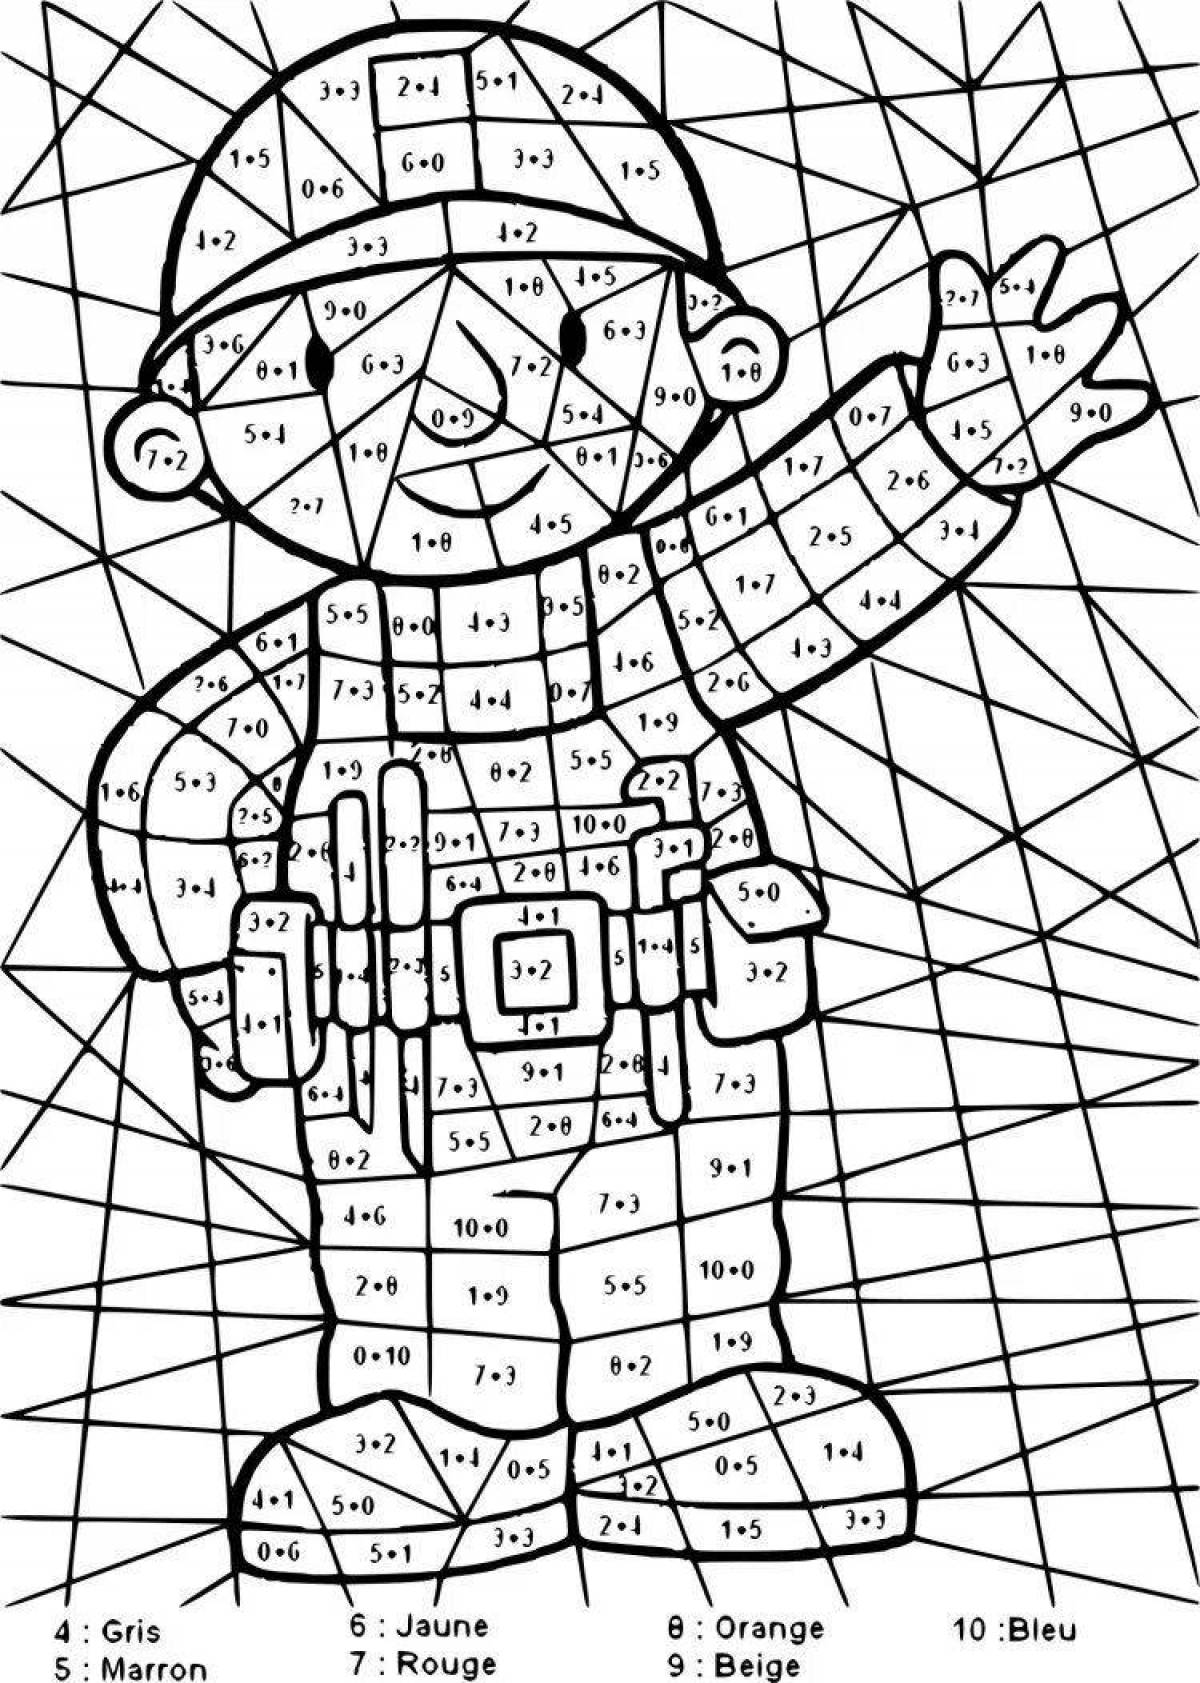 Charming math by numbers coloring book